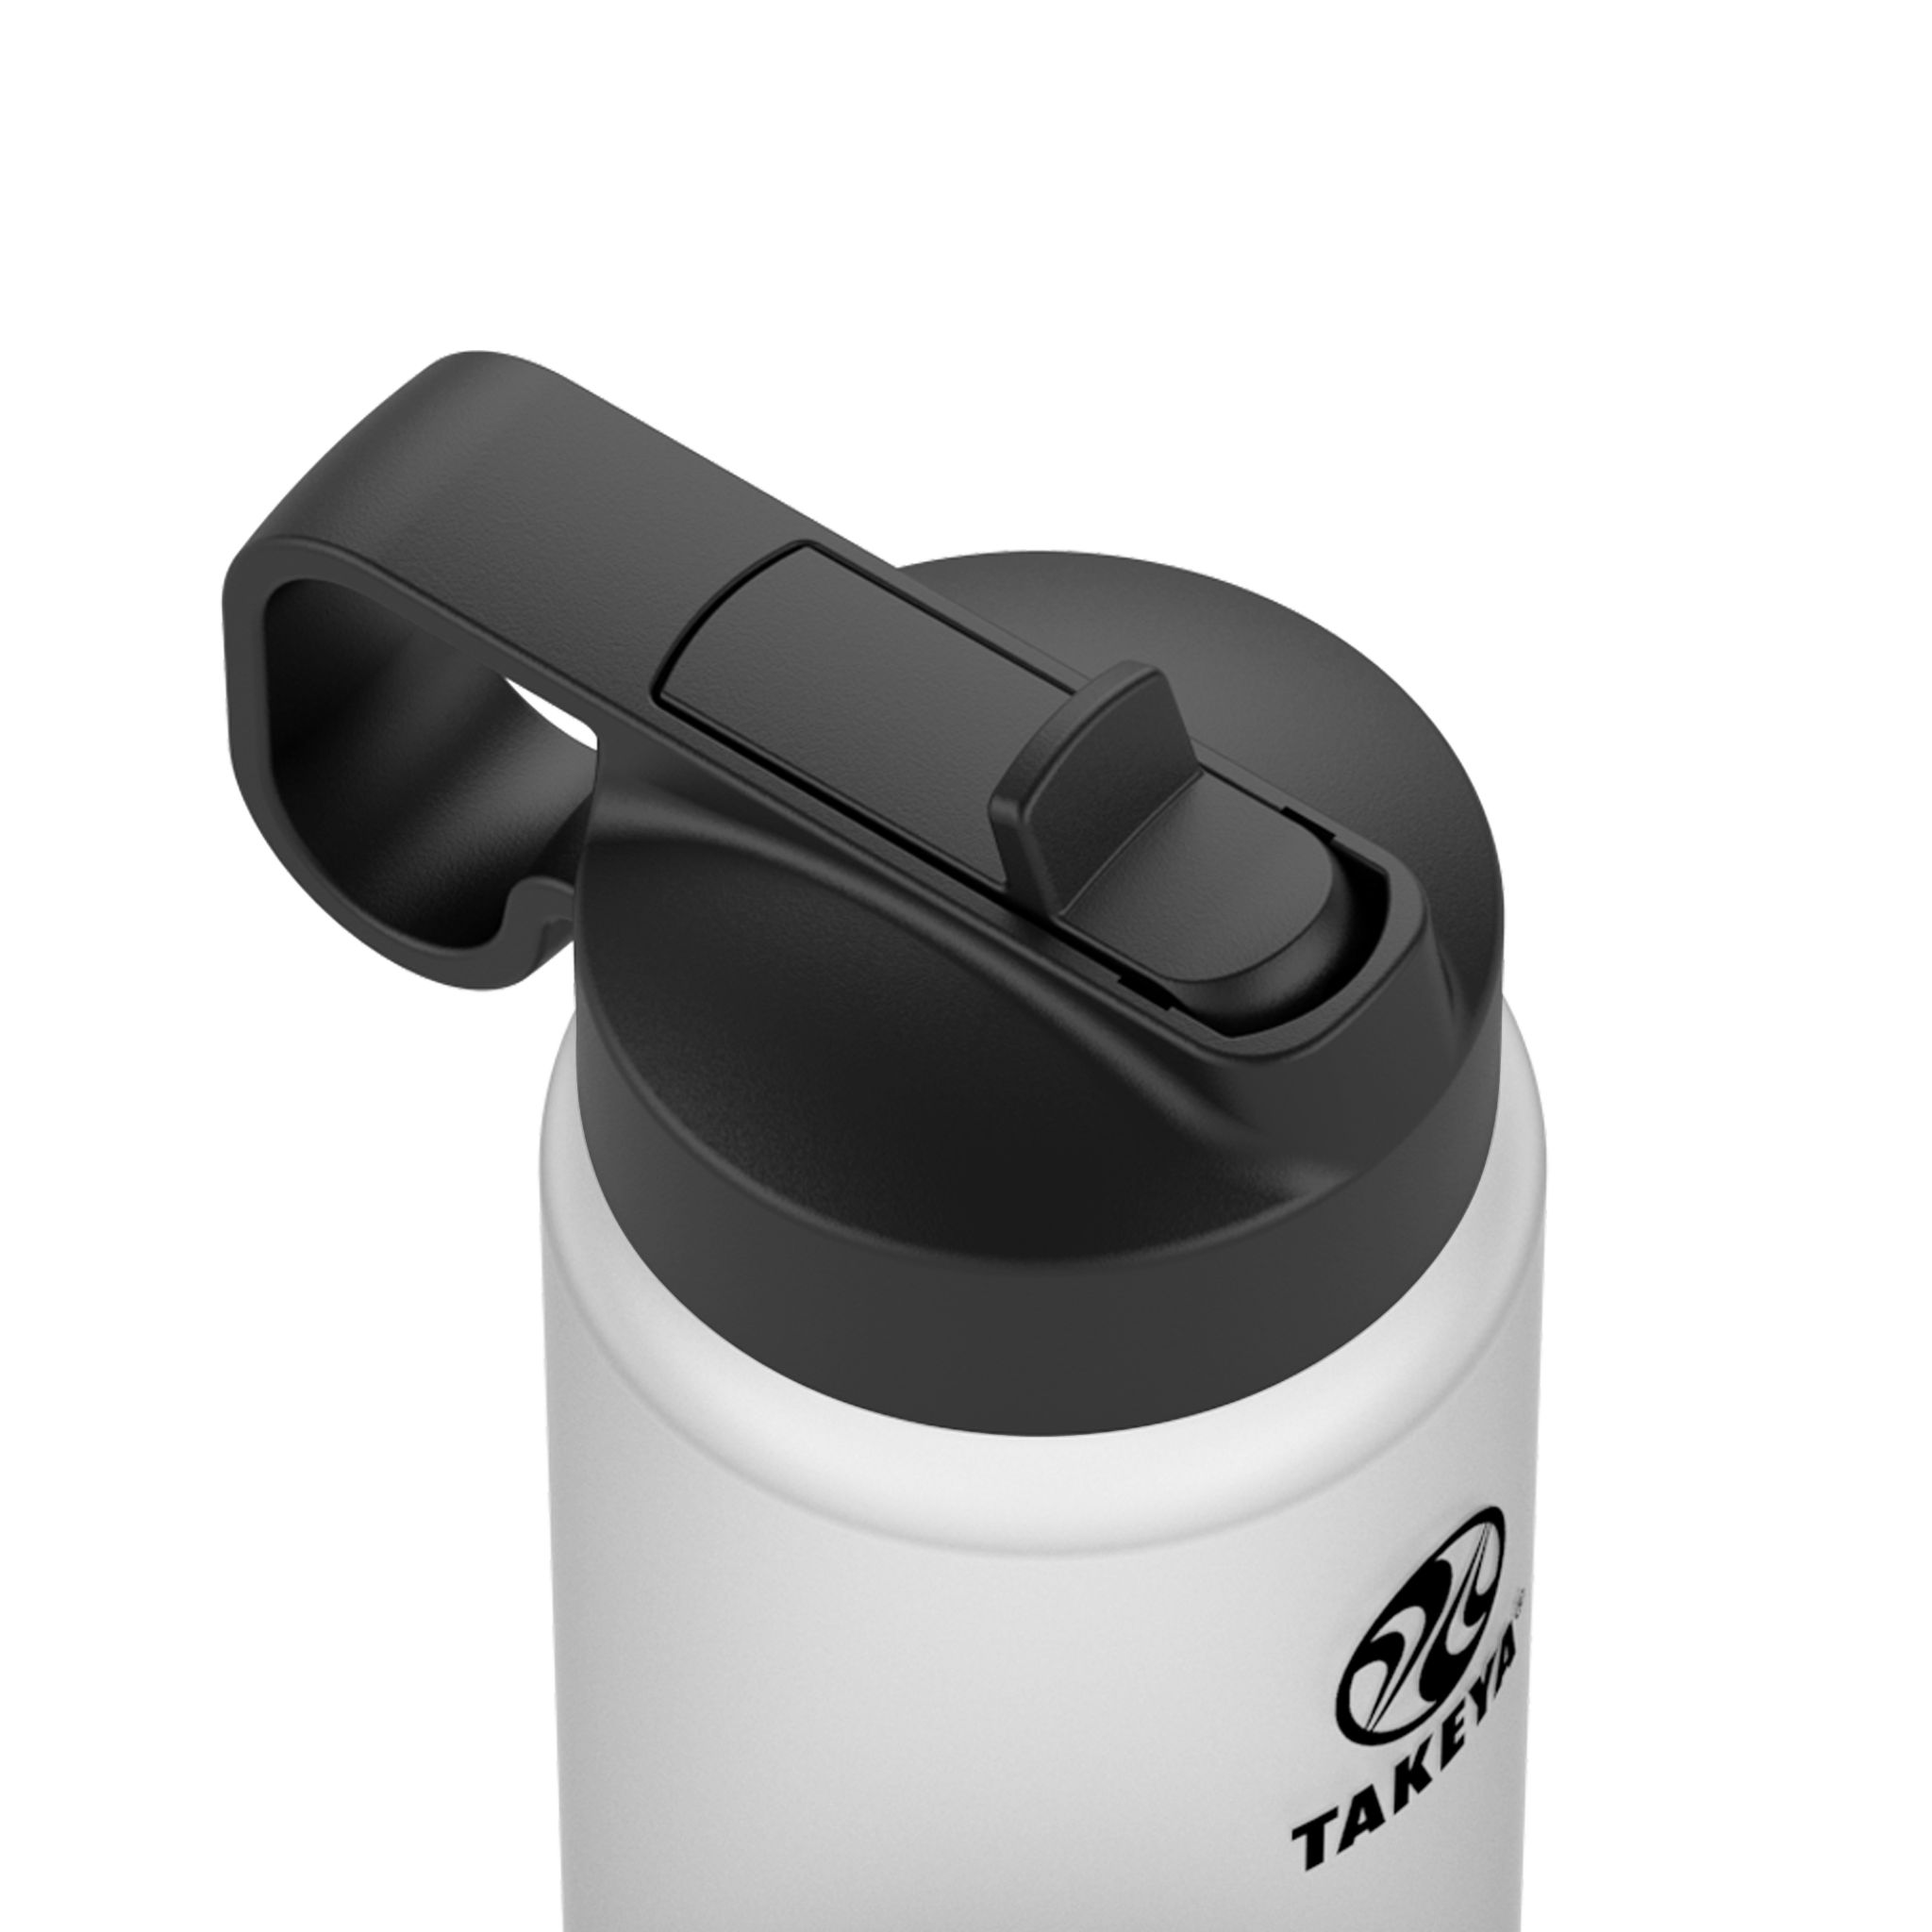 We offer 22oz Stainless Steel Bottle & Comfort Grip Lid + Shock Sleeve  Hidden solutions at affordable prices